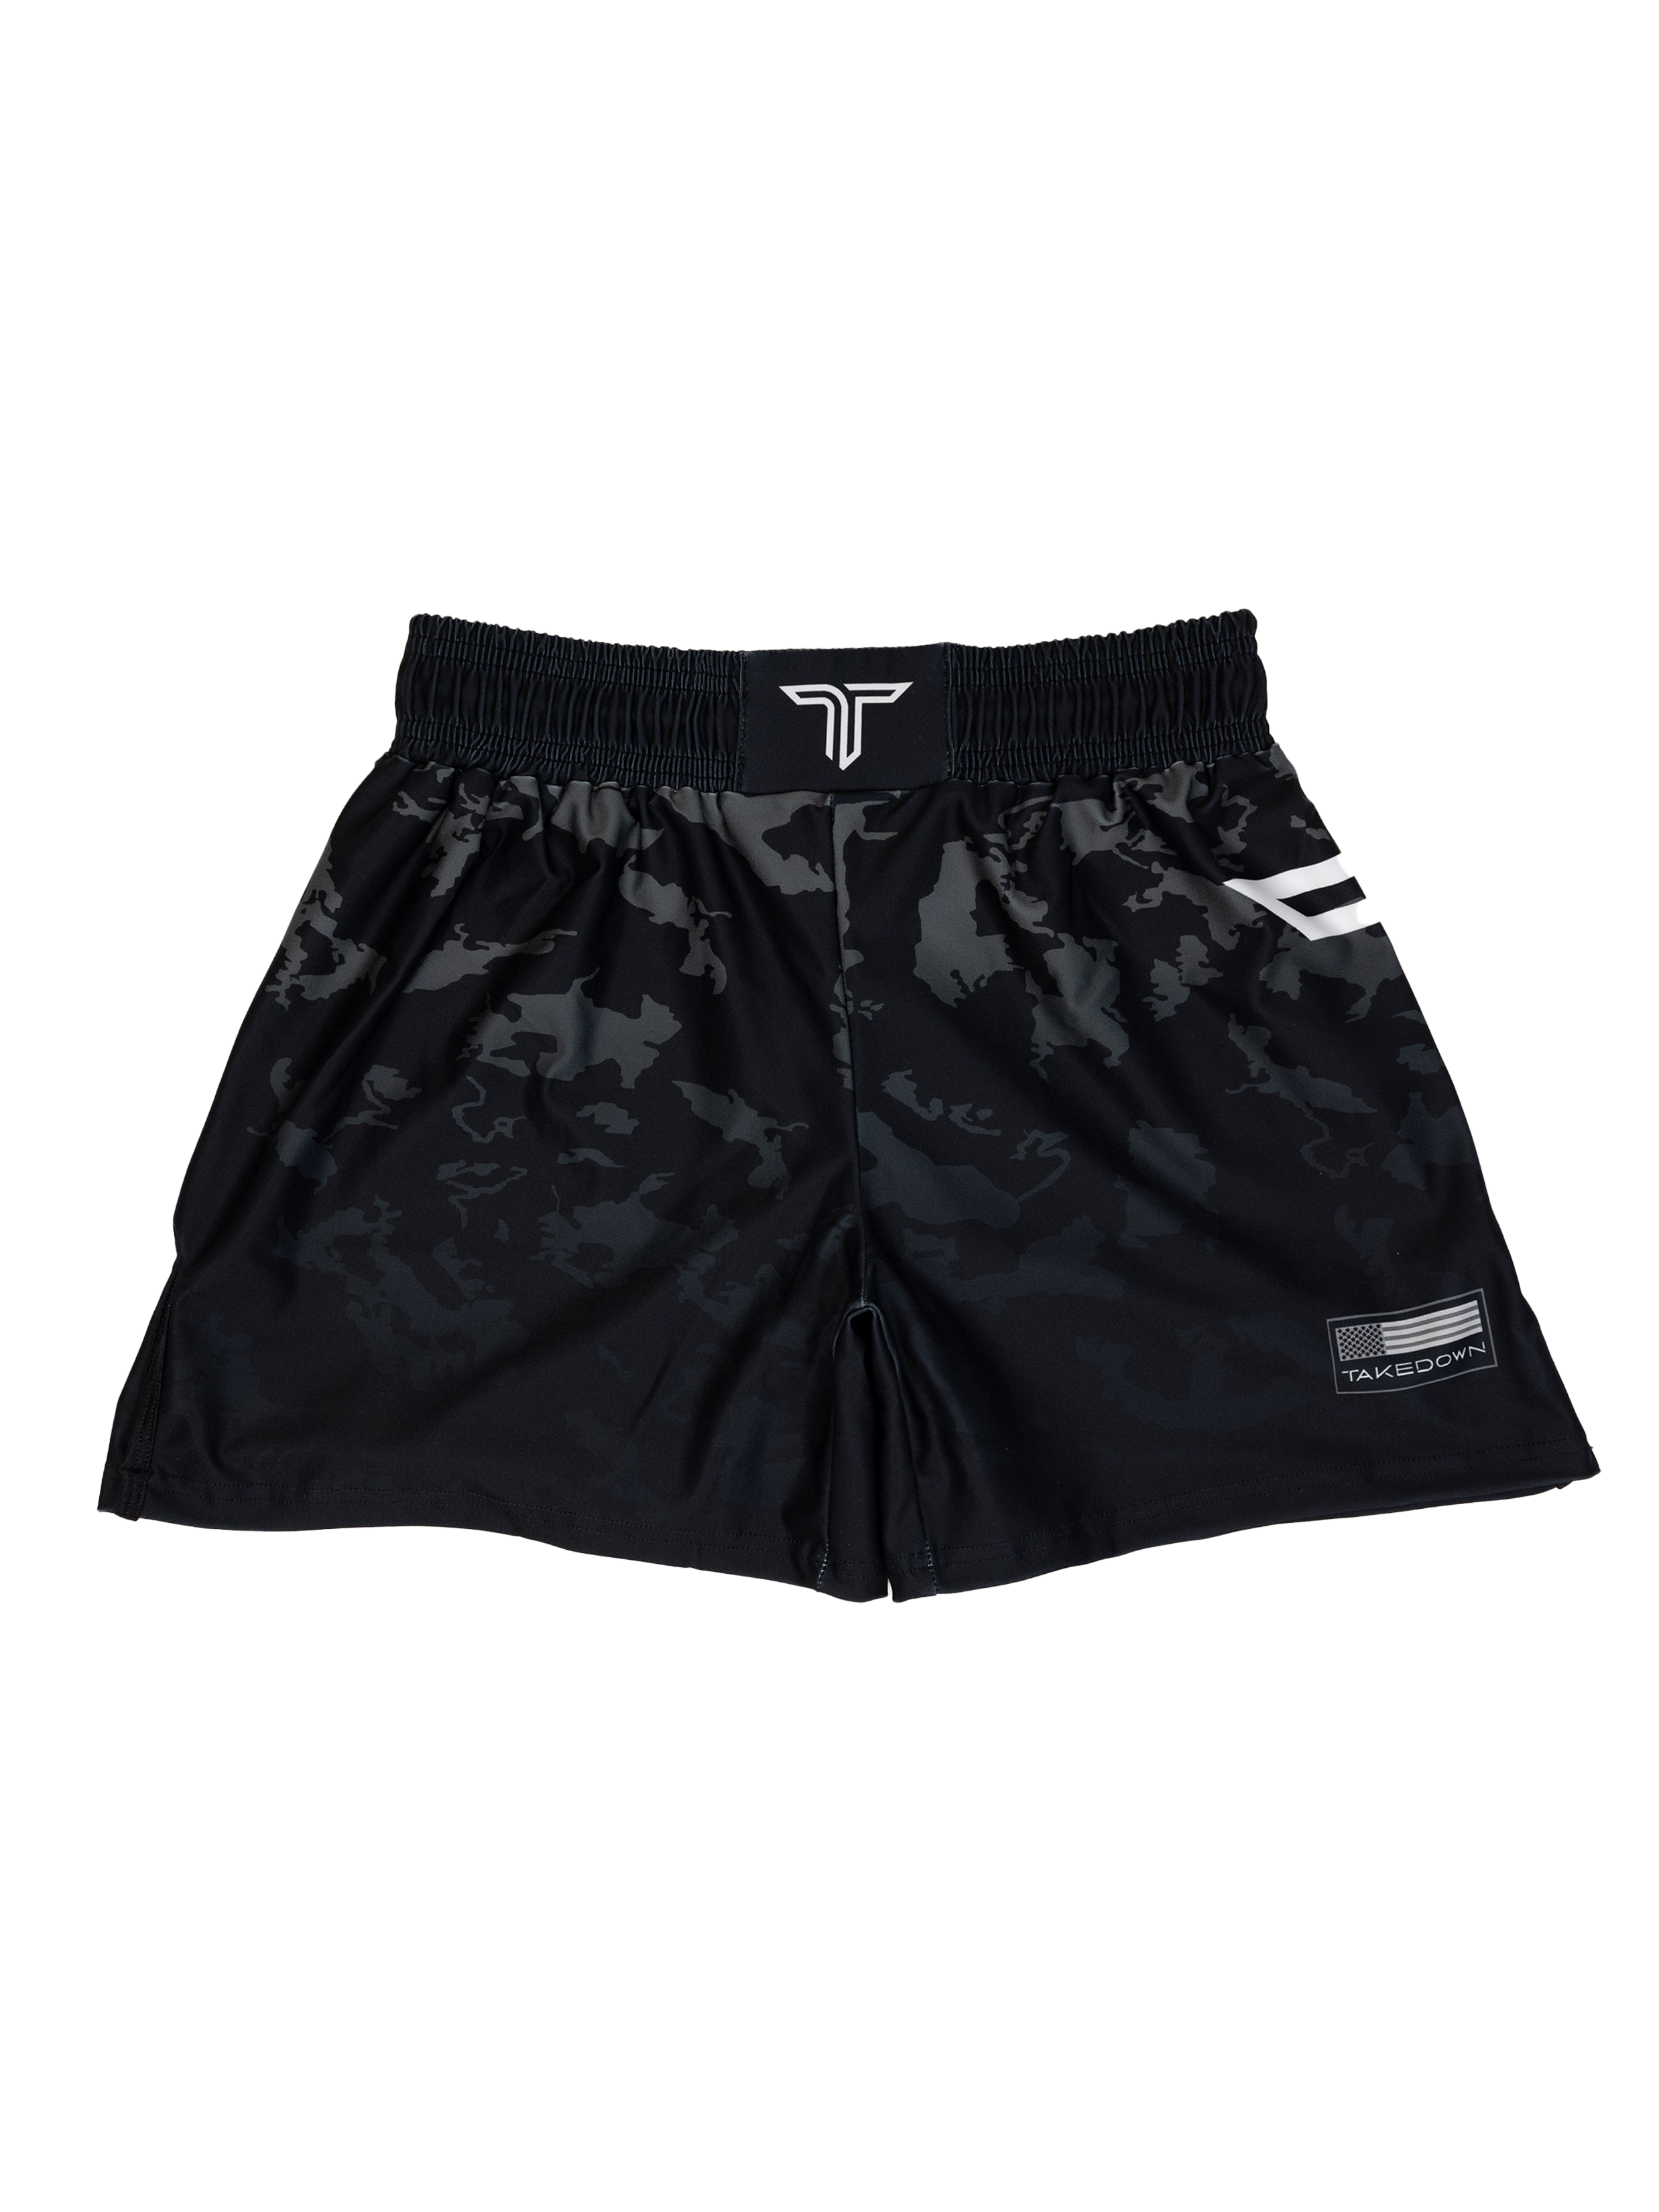 Particle Camo Women's Fight Shorts - Onyx (3